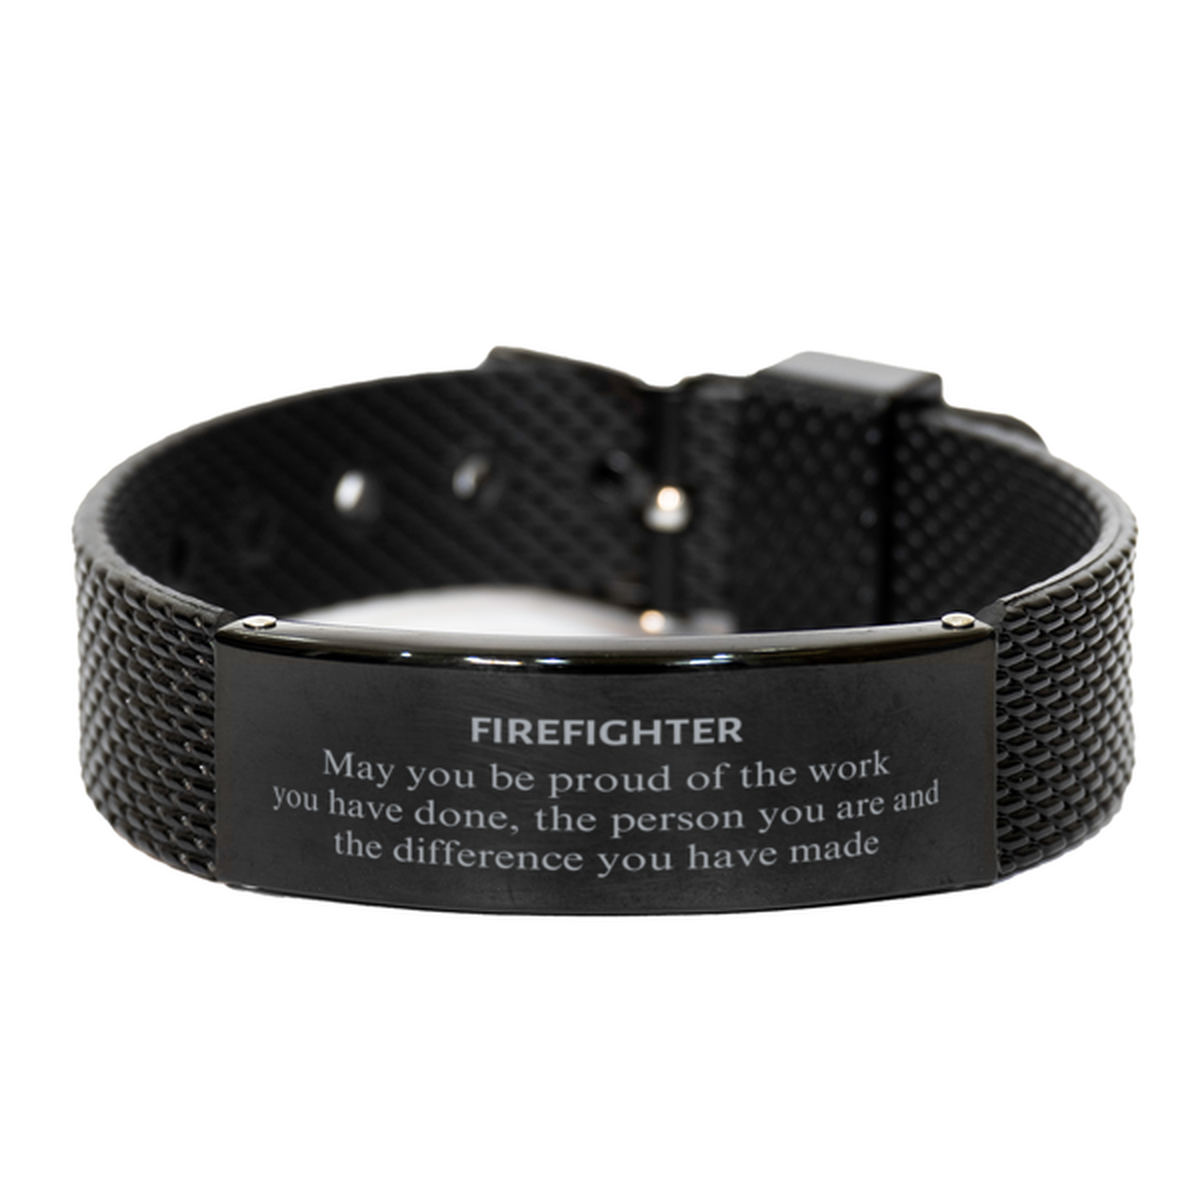 Firefighter May you be proud of the work you have done, Retirement Firefighter Black Shark Mesh Bracelet for Colleague Appreciation Gifts Amazing for Firefighter